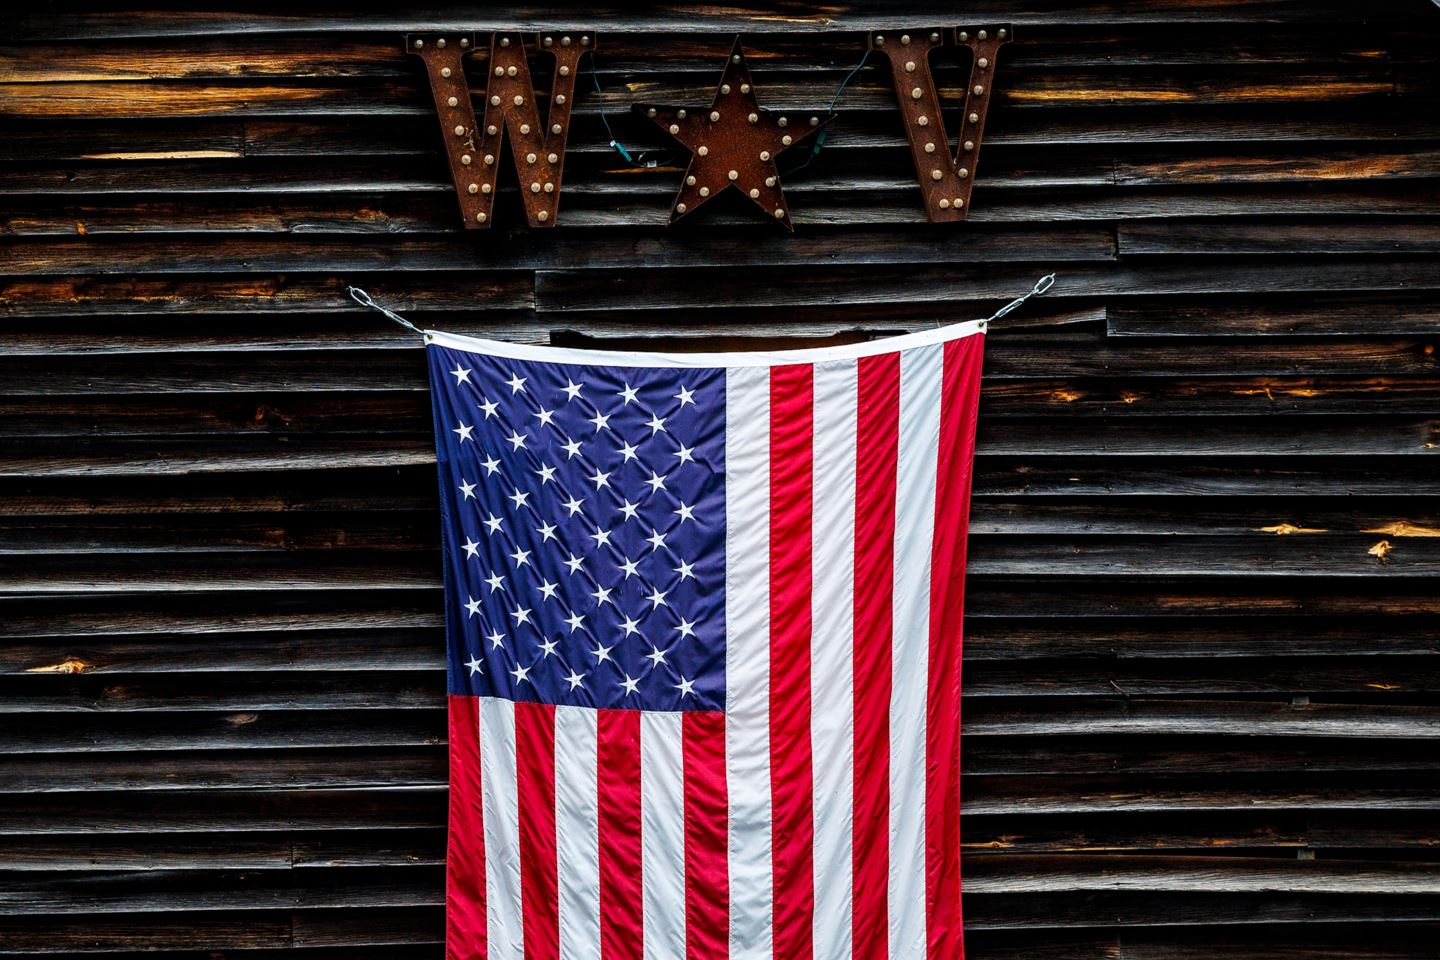 American flag hanging in front of a wooden cabin in Snowshoe, West VIrginia.